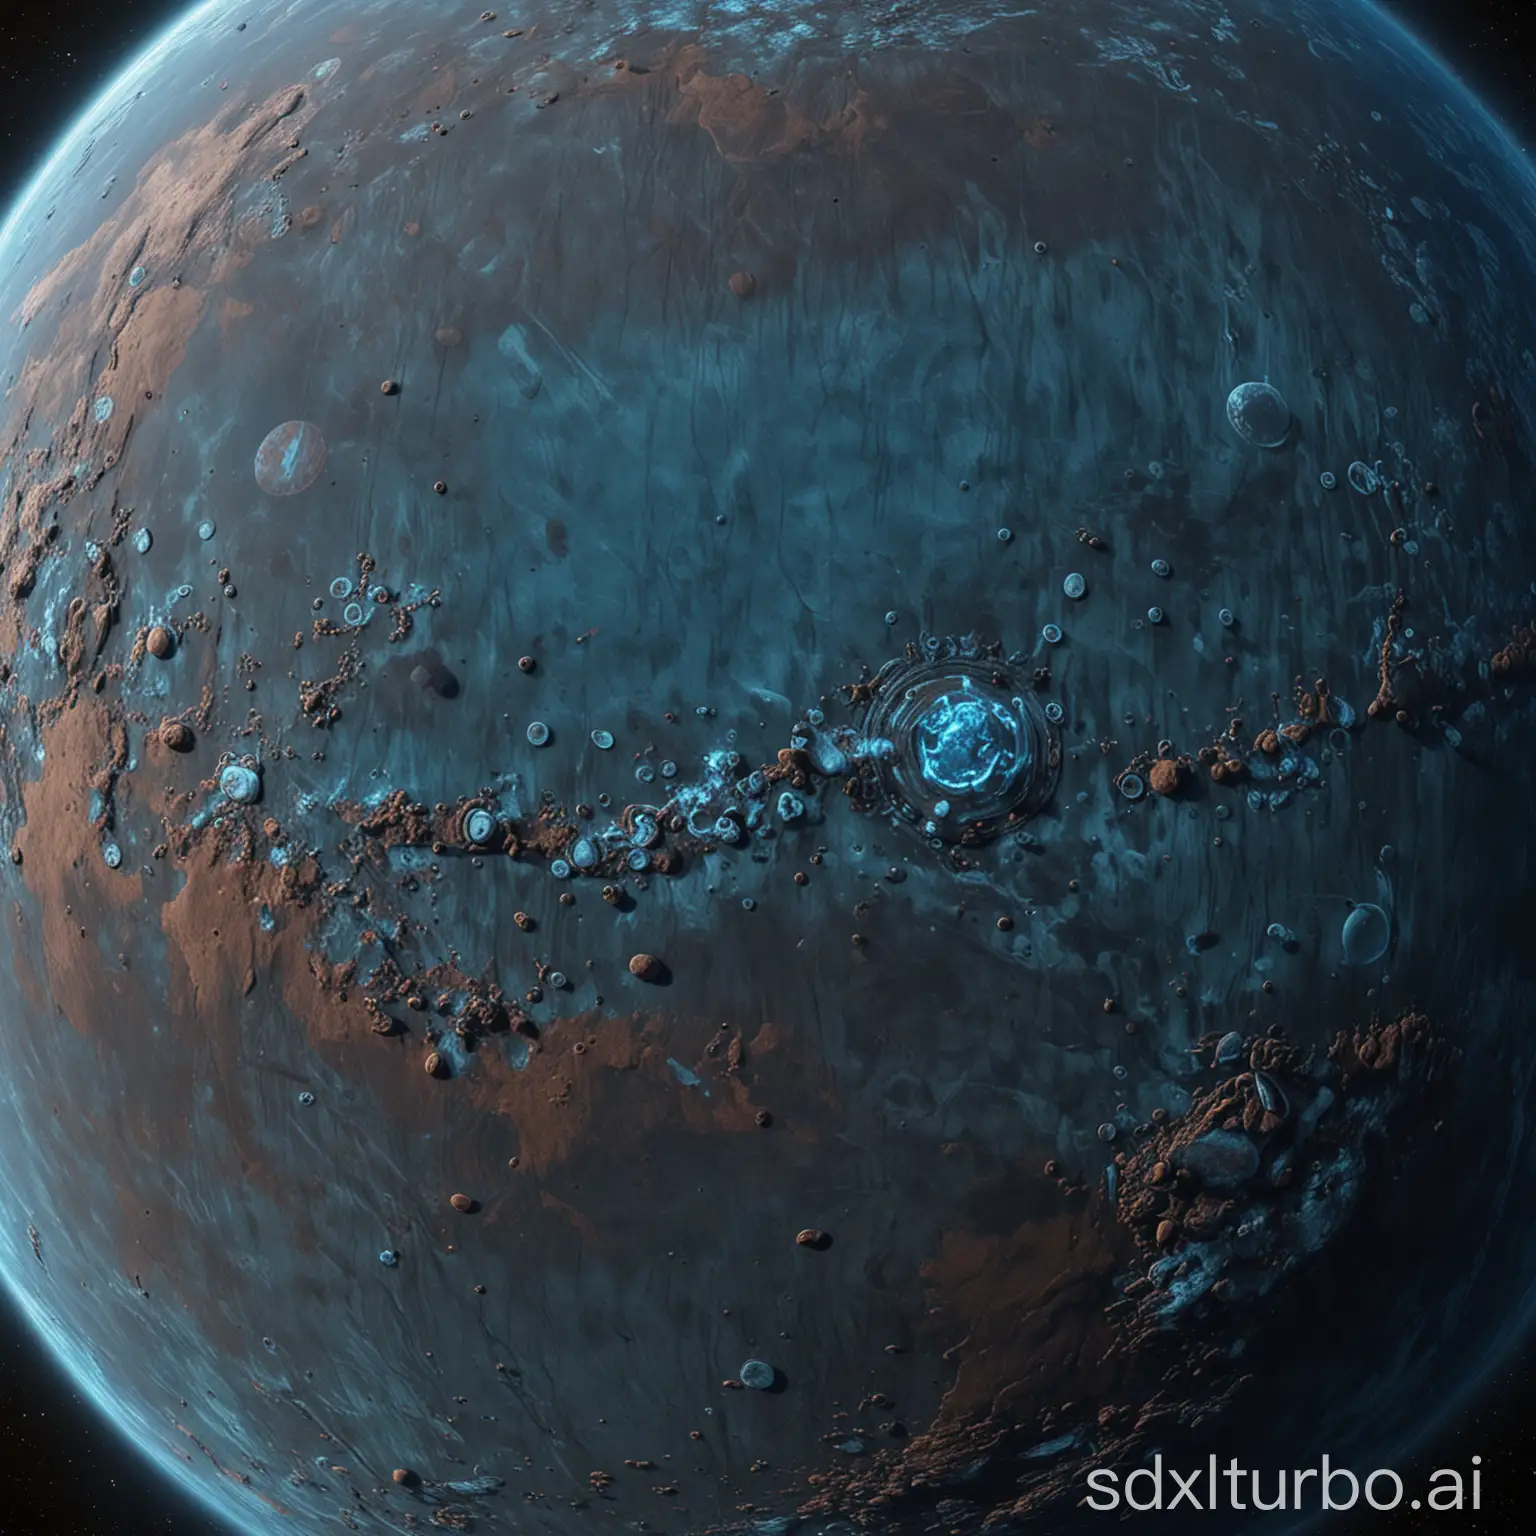 a flat blue gas planet texture, lot of details, texture covers the whole image